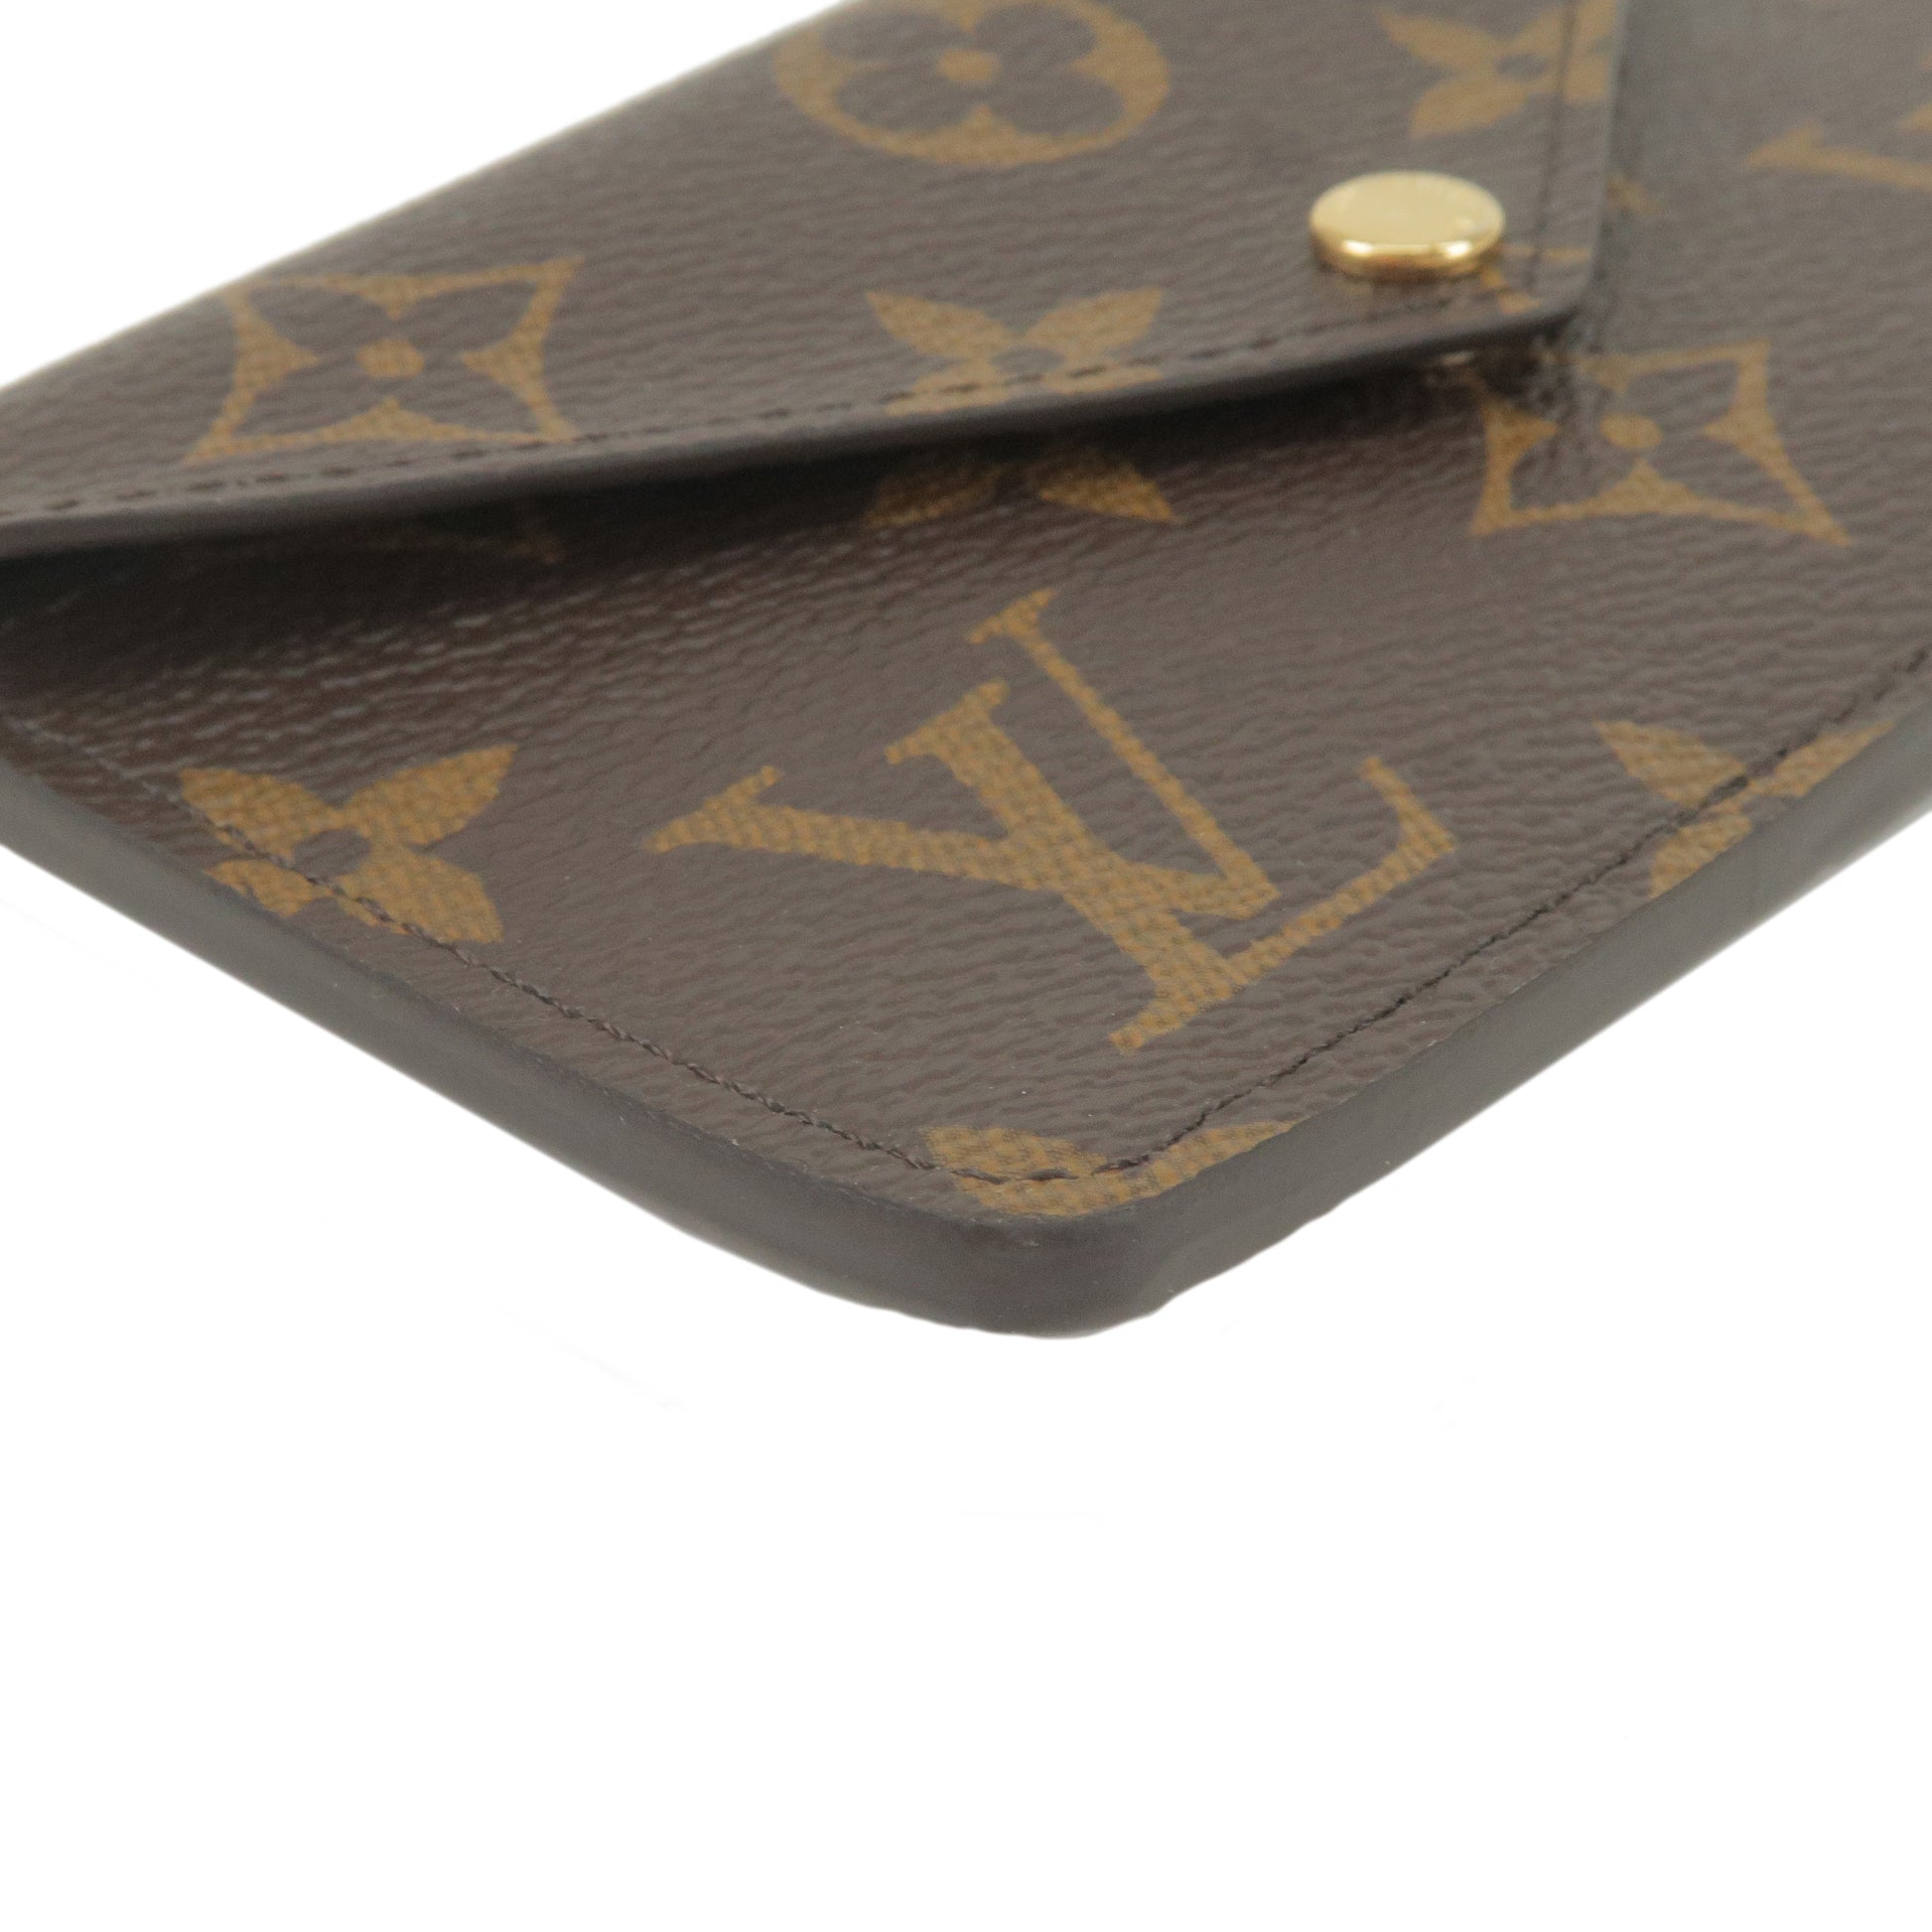 Card Holder Recto Verso Monogram Canvas - Wallets and Small Leather Goods  M69431